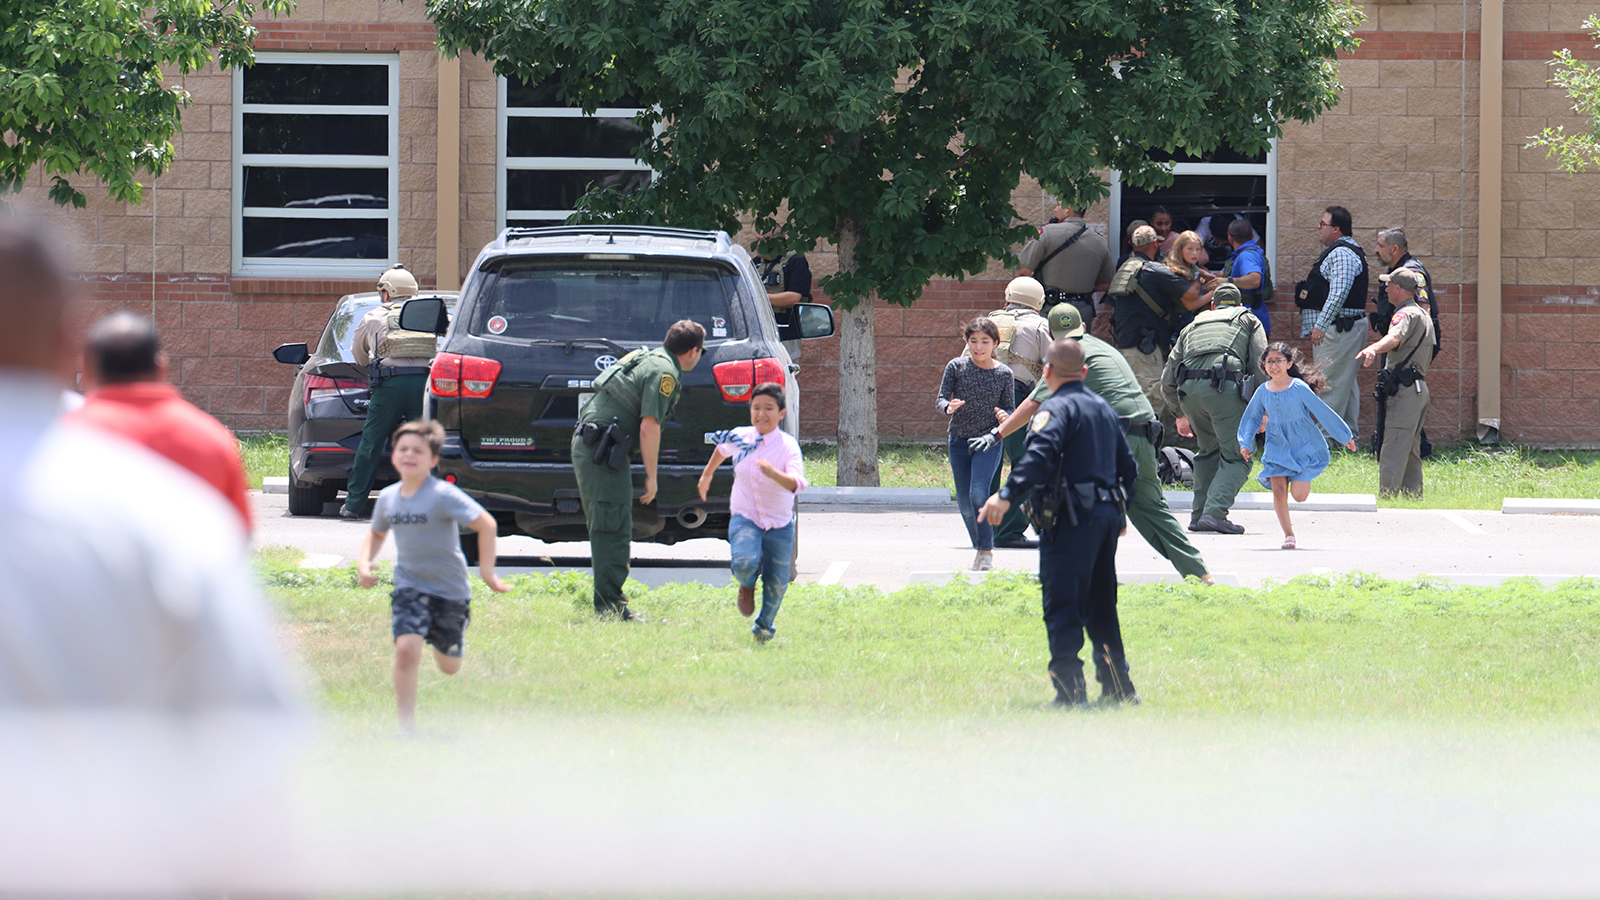 Students run to safety after escaping from a window at Robb Elementary School on May 24.